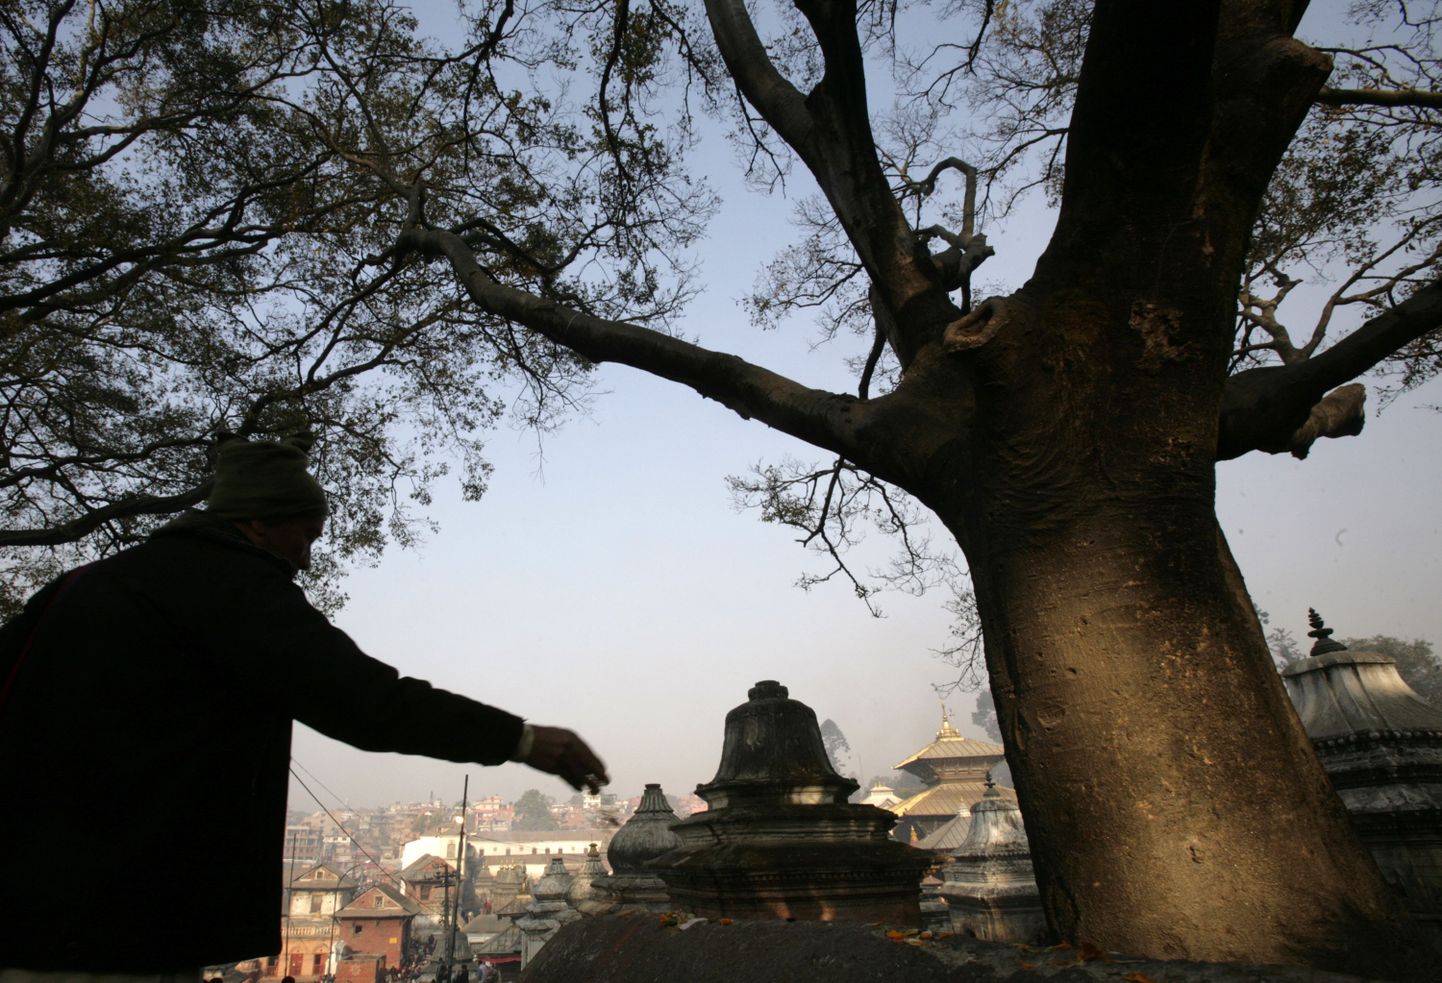 A worshipper scatters "sat biu" to a tree at Pashupatinath Temple in Kathmandu November 26, 2008. The festival of Bala Chaturdashi at Pashupatinath temple is celebrated by worshippers who scatter seven types of grain known as "sat biu" in memories of the departed along a prescribed route including trees and temples at Pashupatinath temple. REUTERS/Deepa Shrestha (NEPAL)